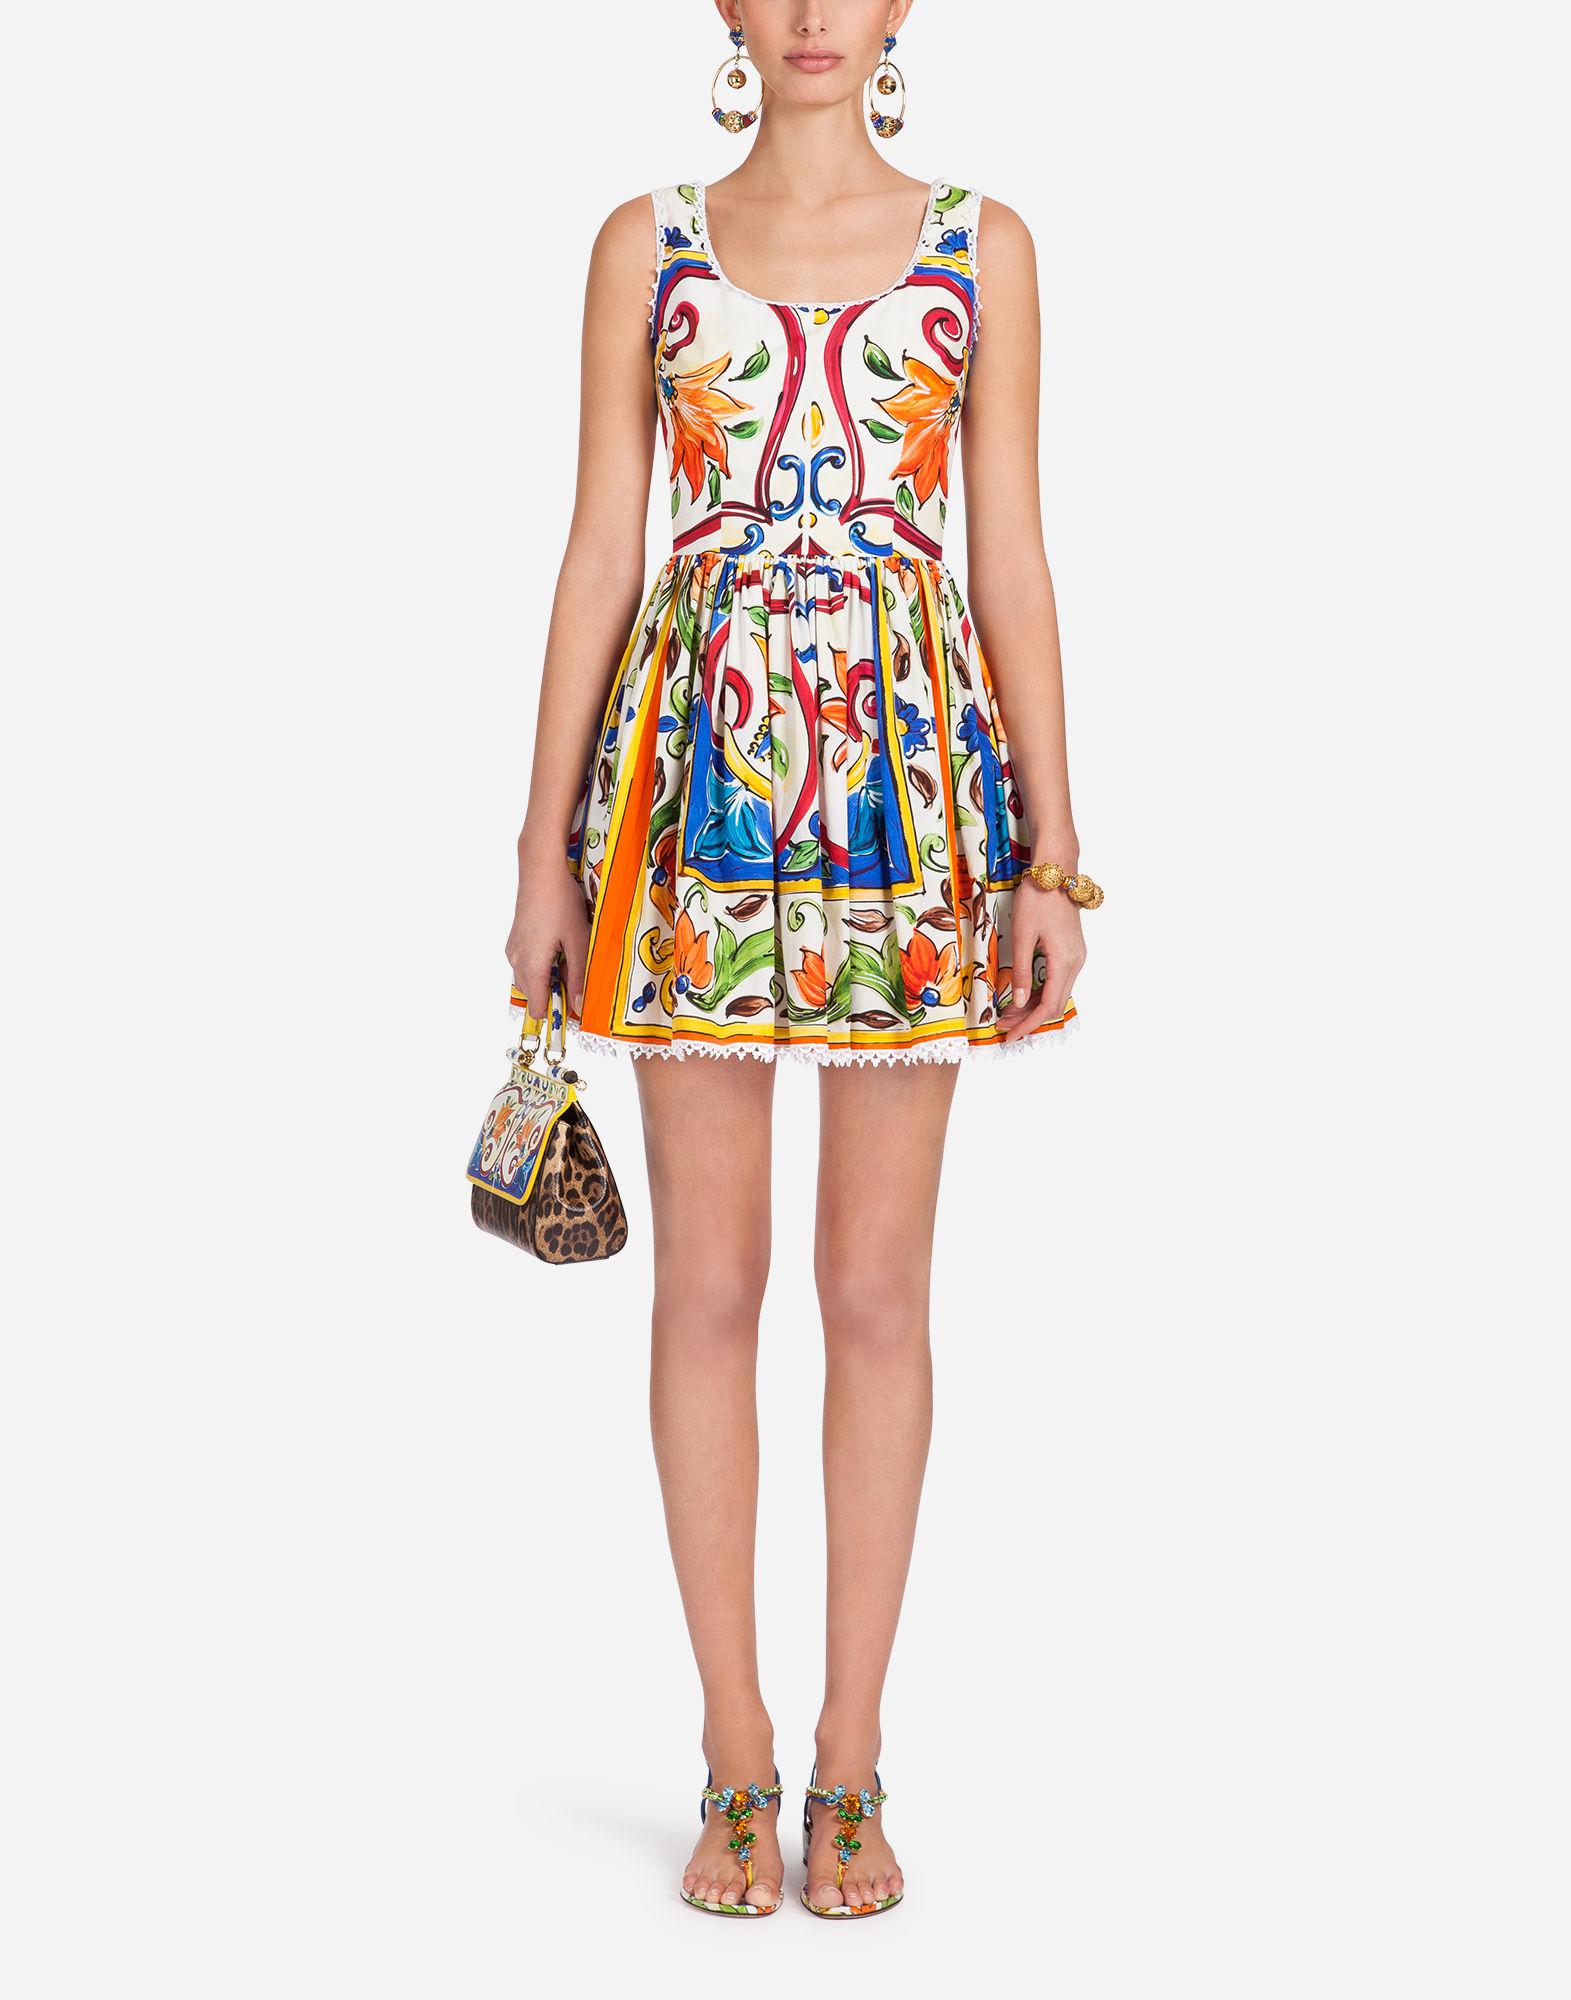 dolce and gabbana printed cotton dress